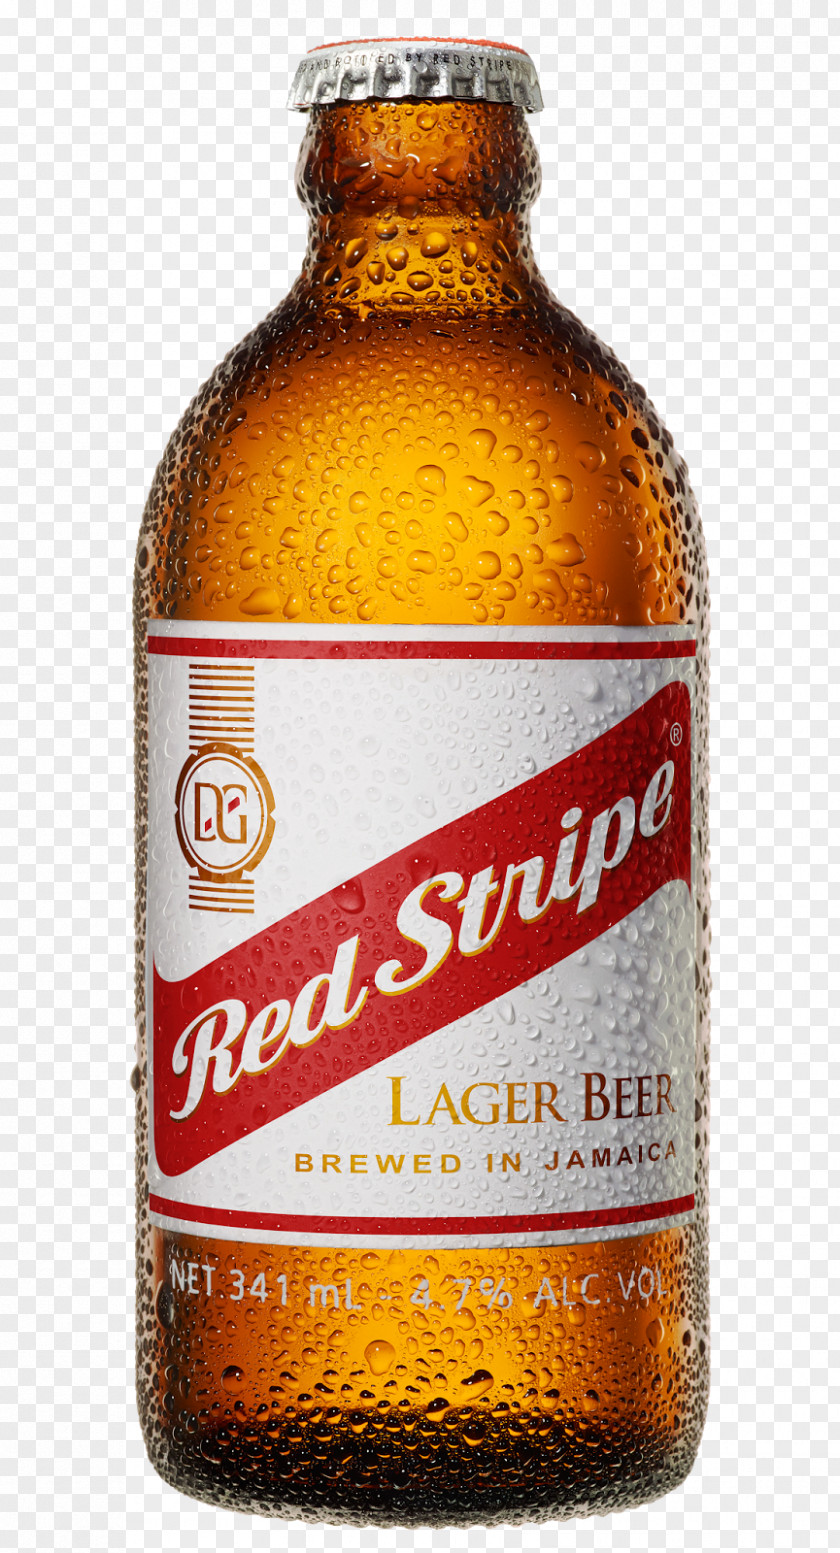 Beer Red Stripe Lager Guinness Yuengling PNG